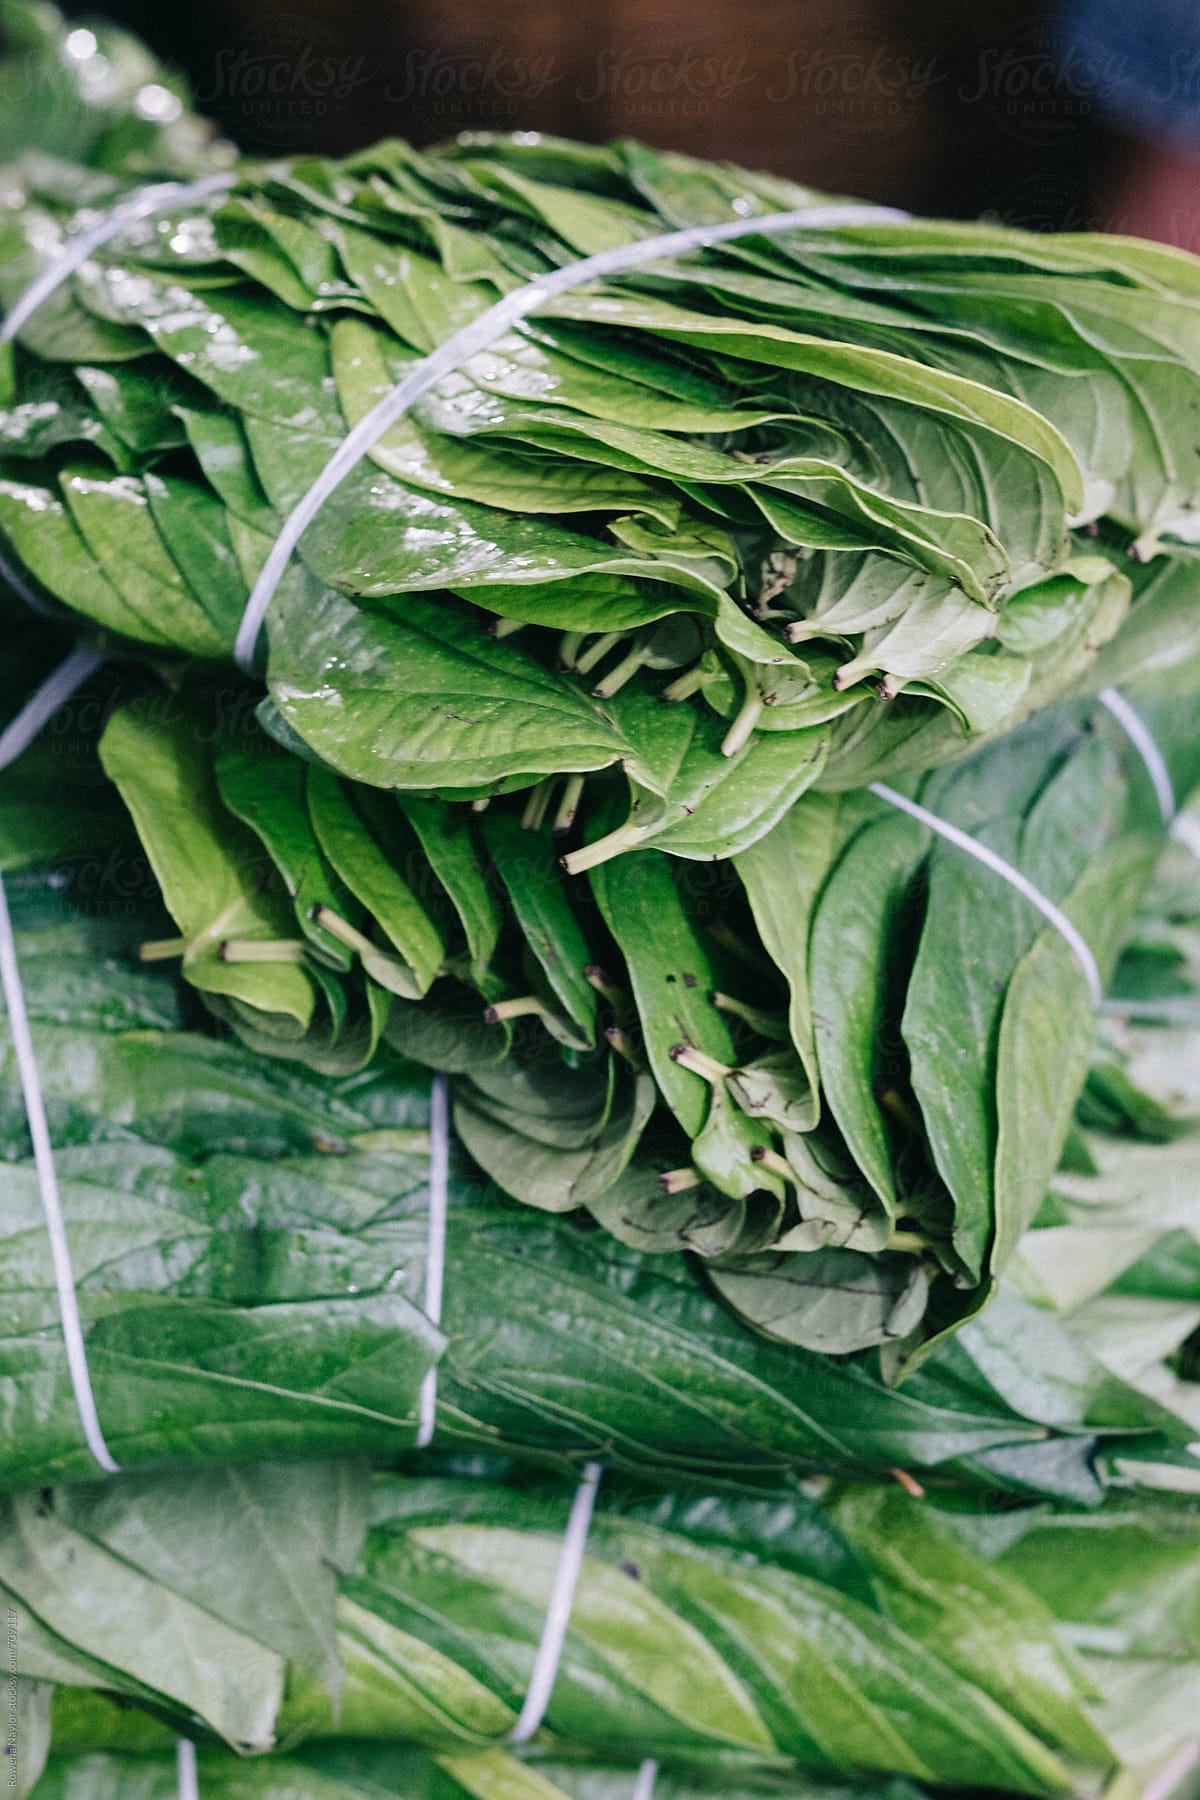 Betel Leaves at street market in Cambodia